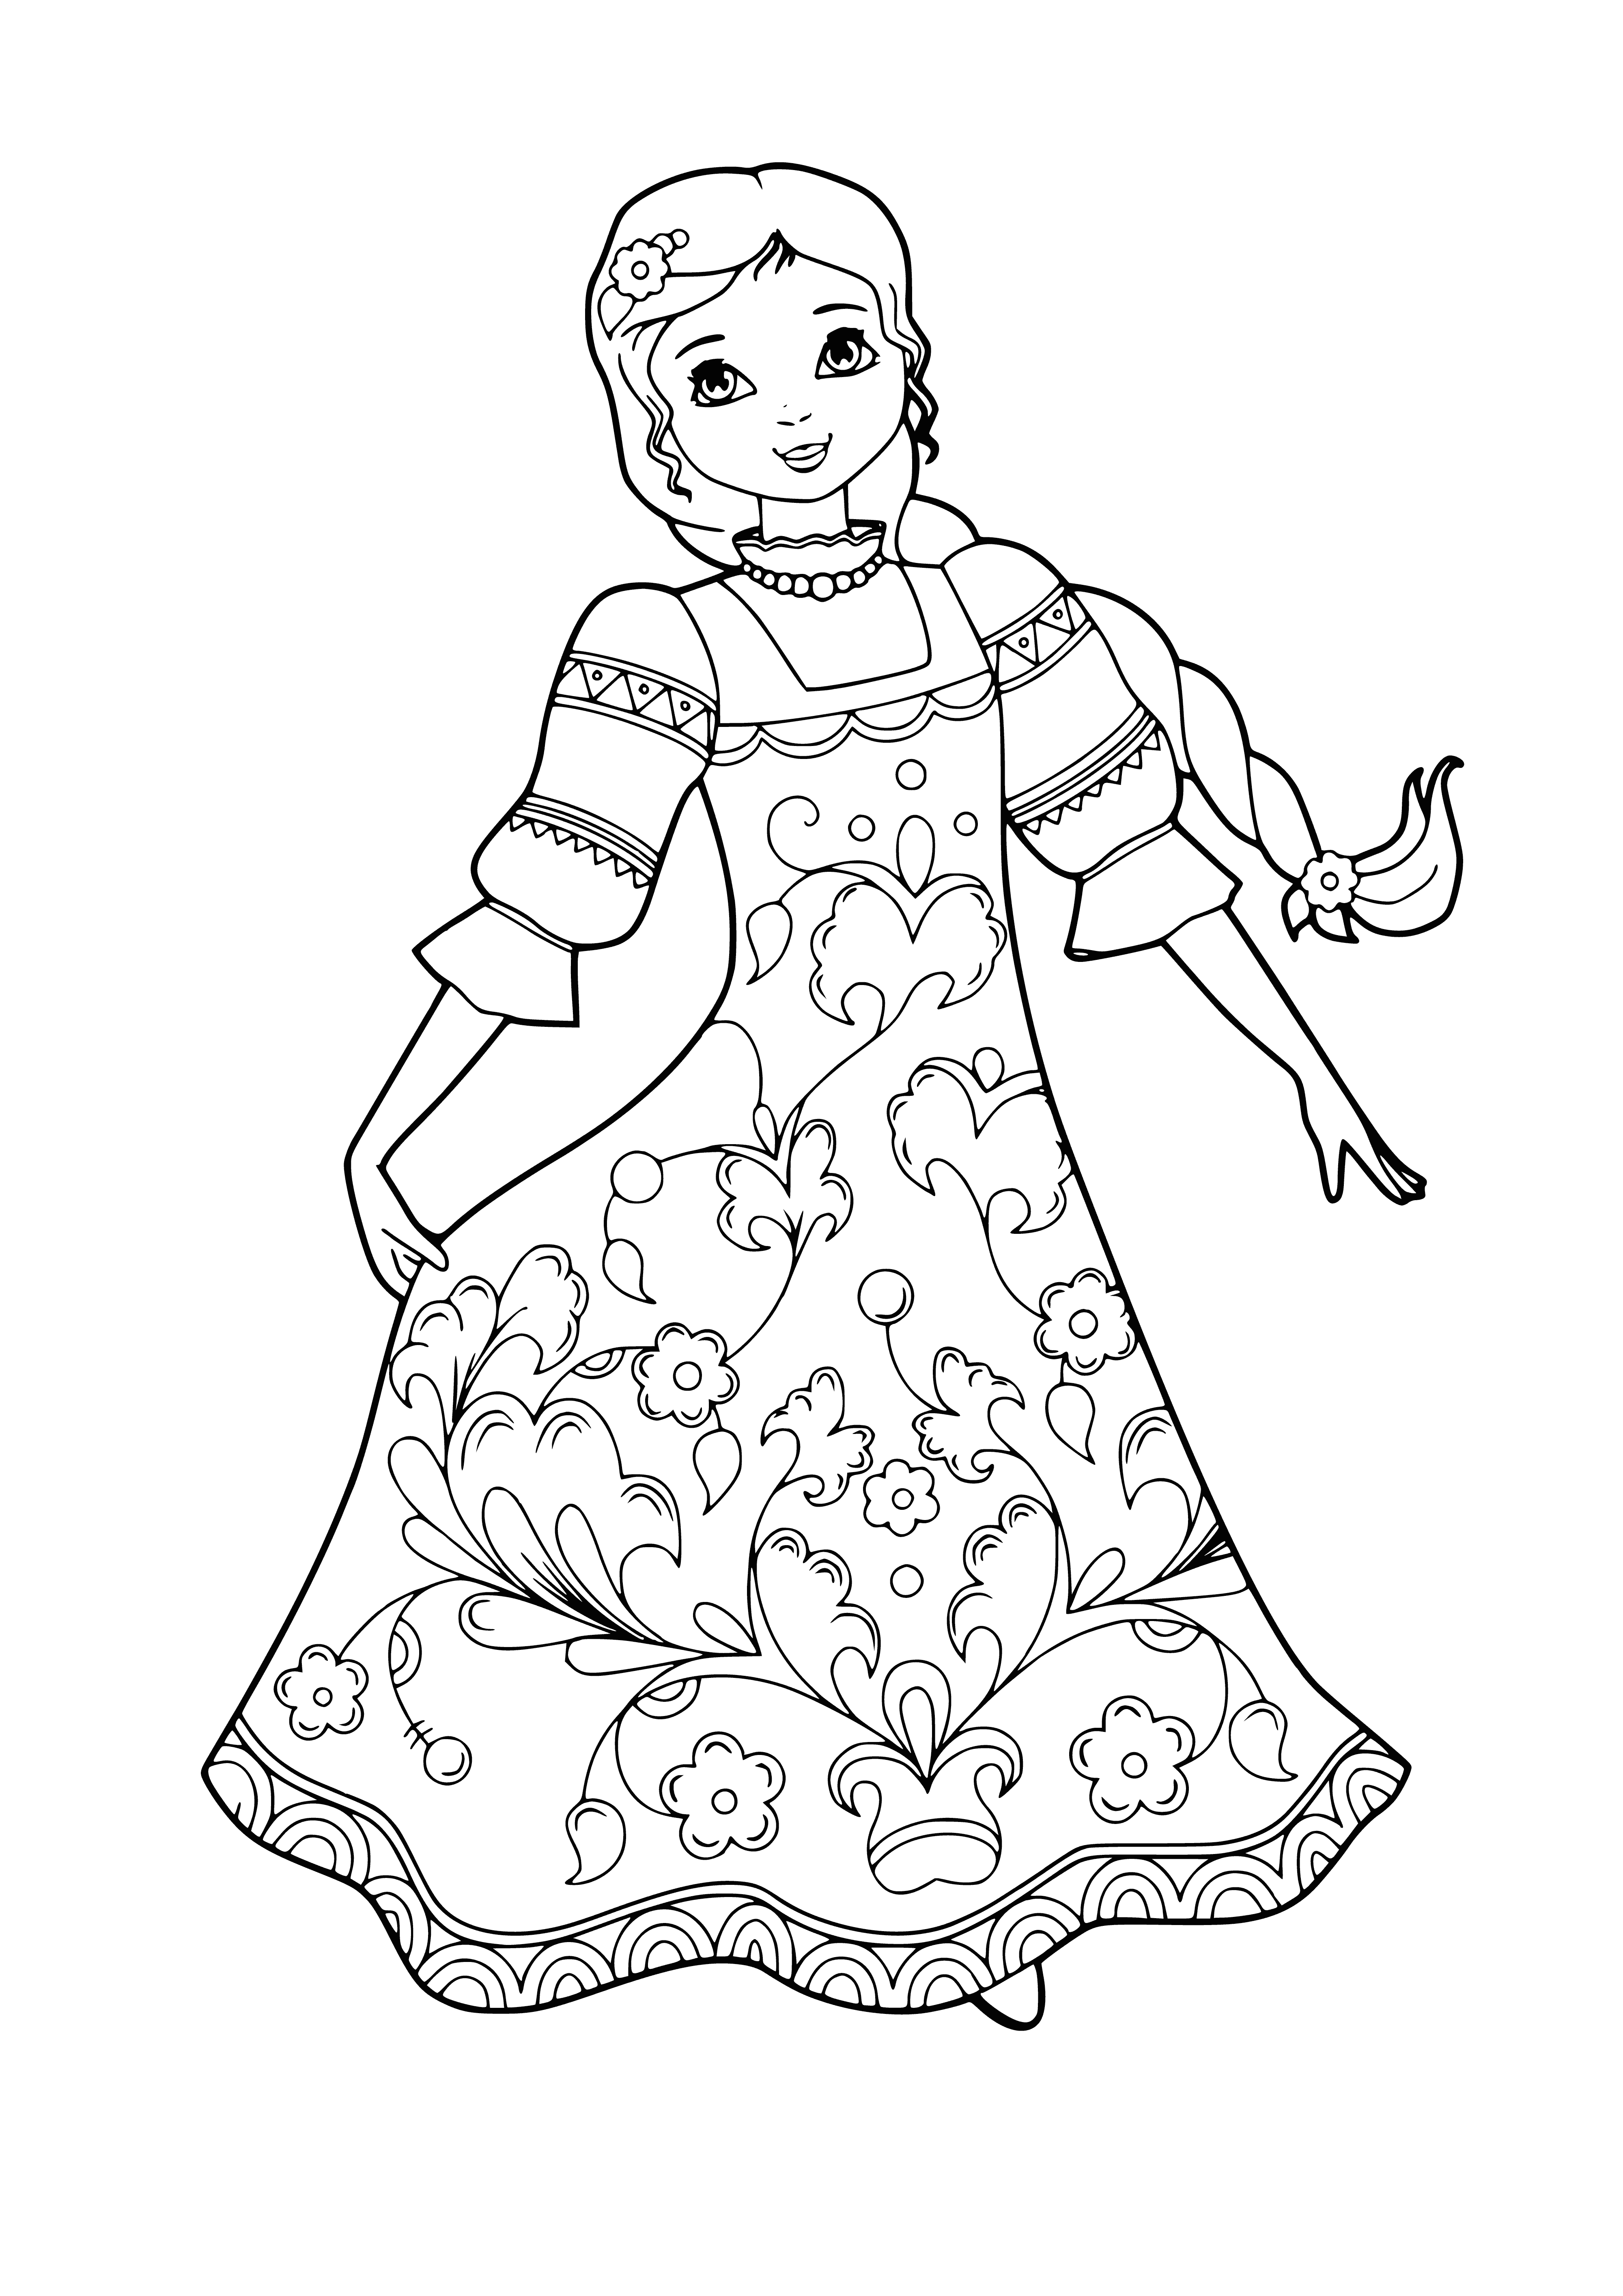 Girl in Russian dress coloring page